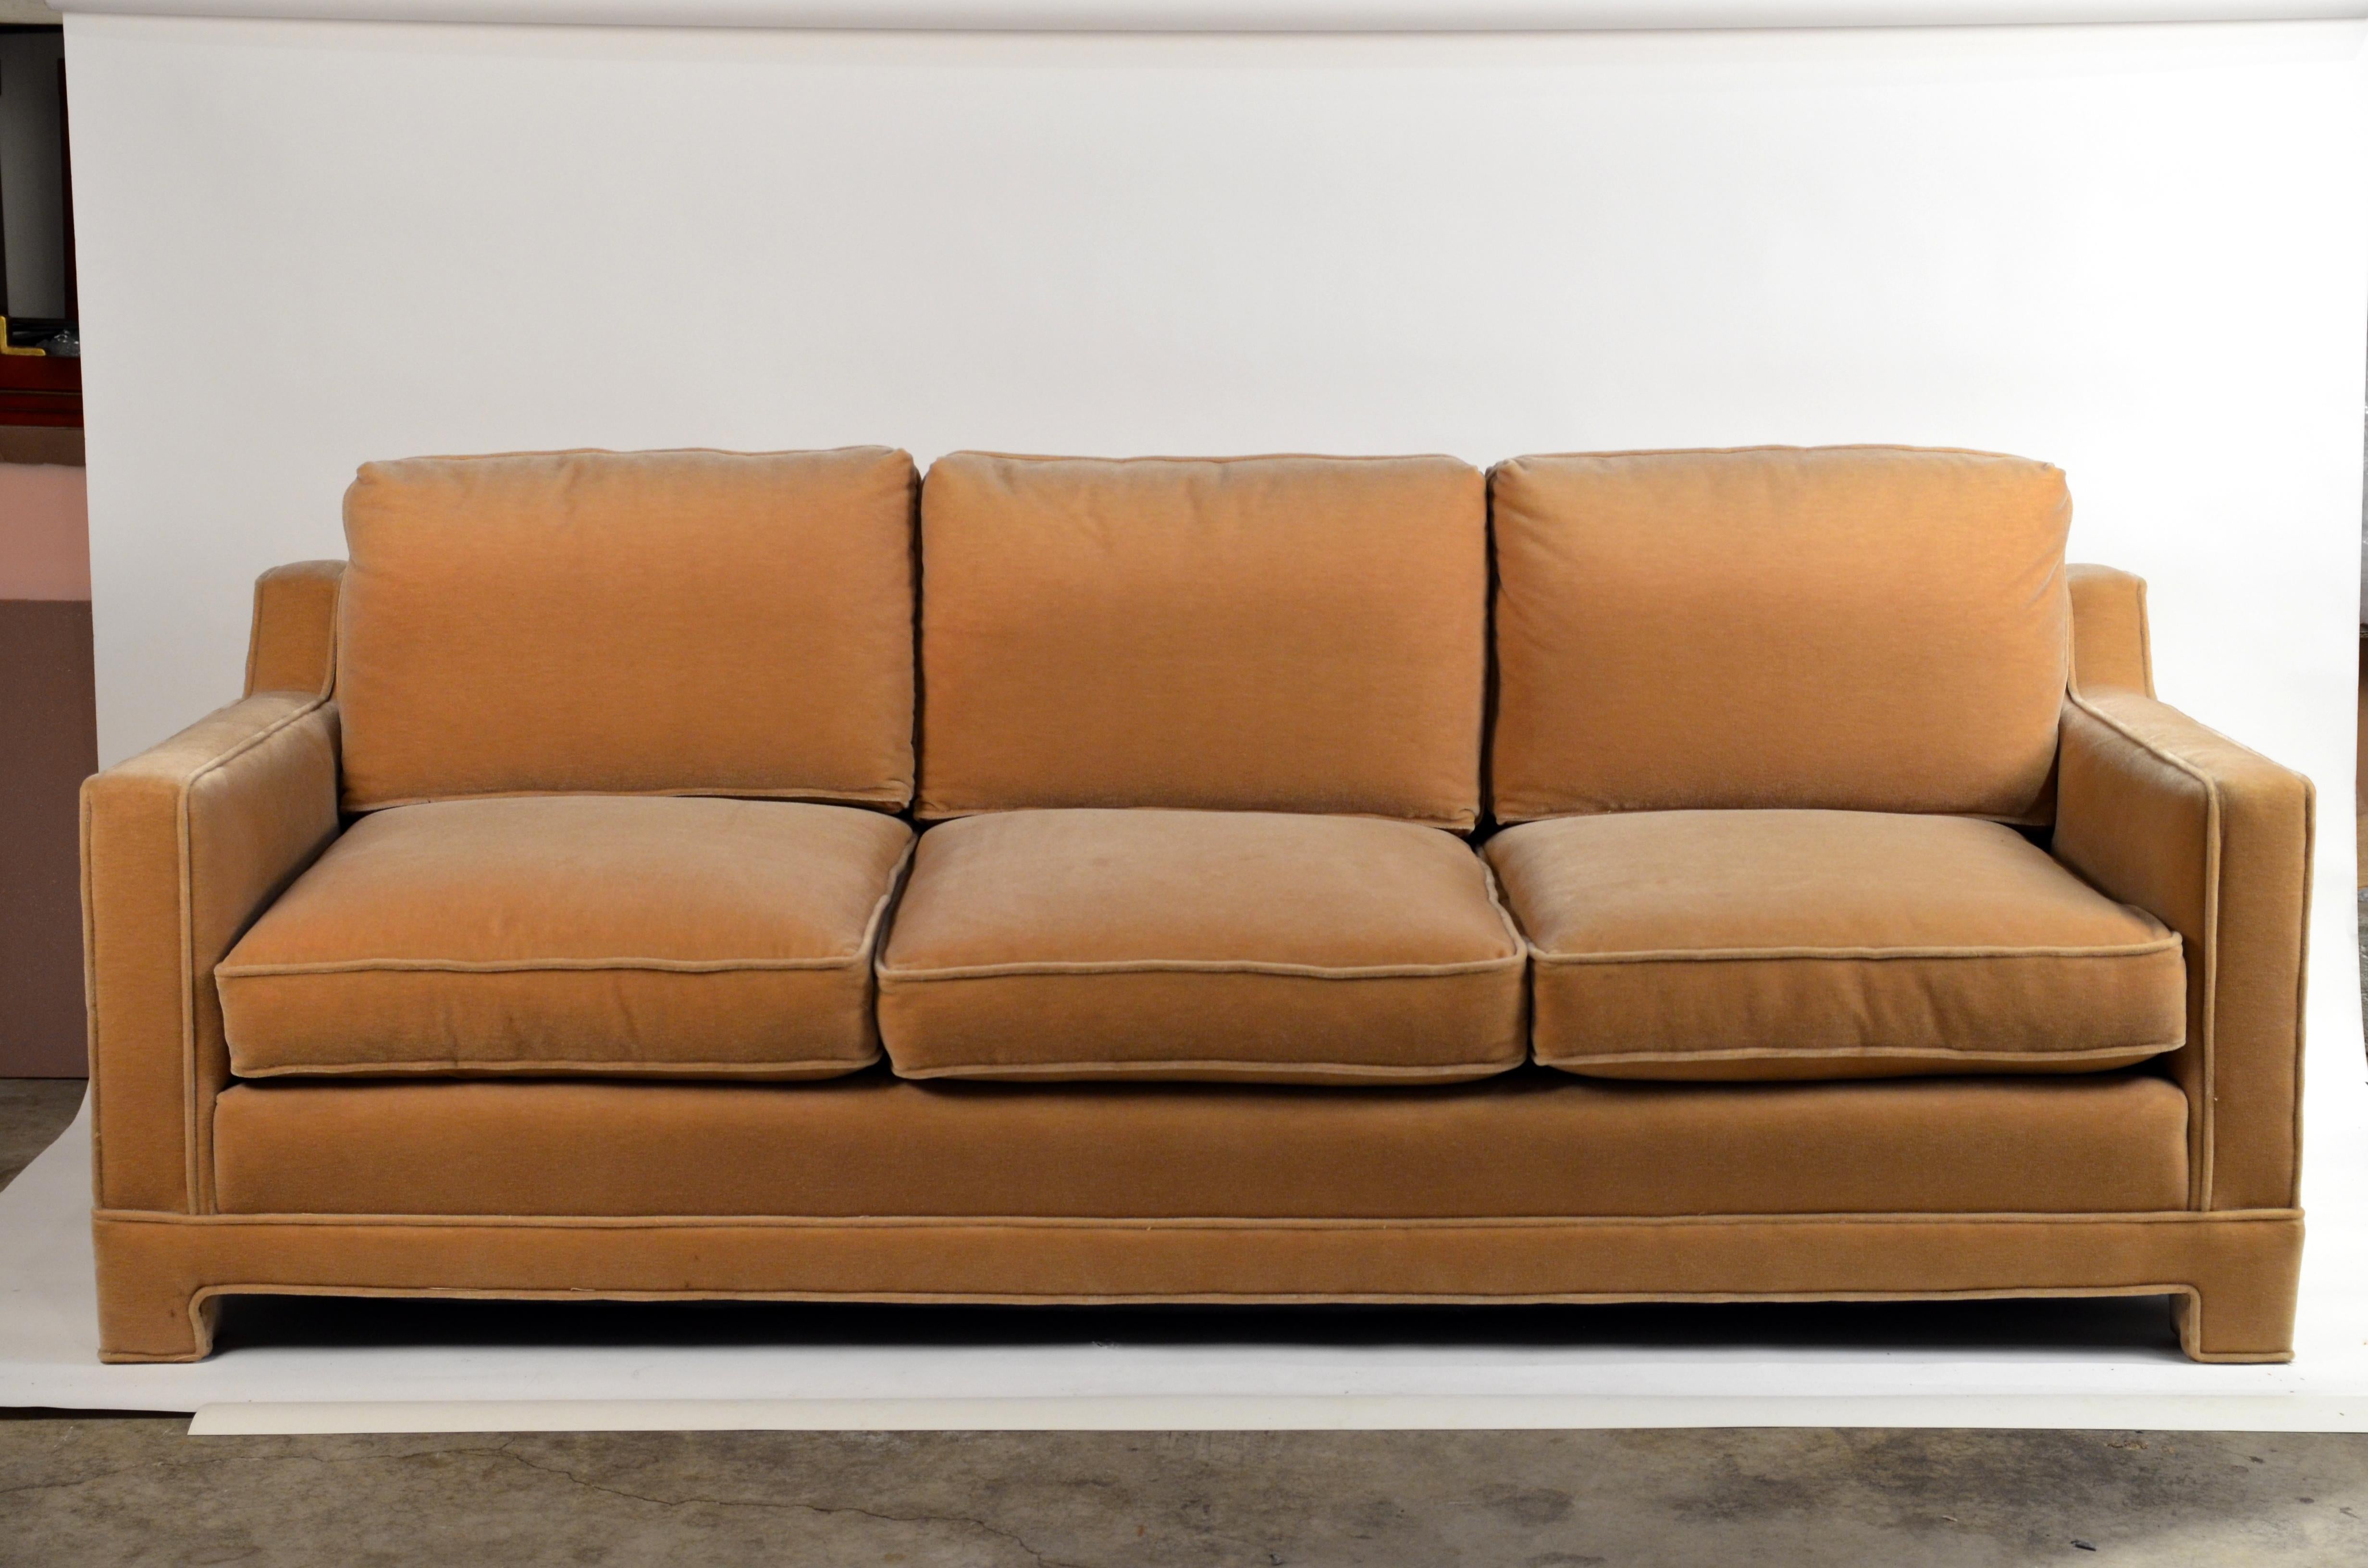 The 'Verneuil' sofa is the latest addition to our exclusive Design Frères line. inspired by Jean-Michel Frank's timeless Art Deco aesthetic, it is built to the highest standards of comfort and durability and upholstered in a chic camel mohair